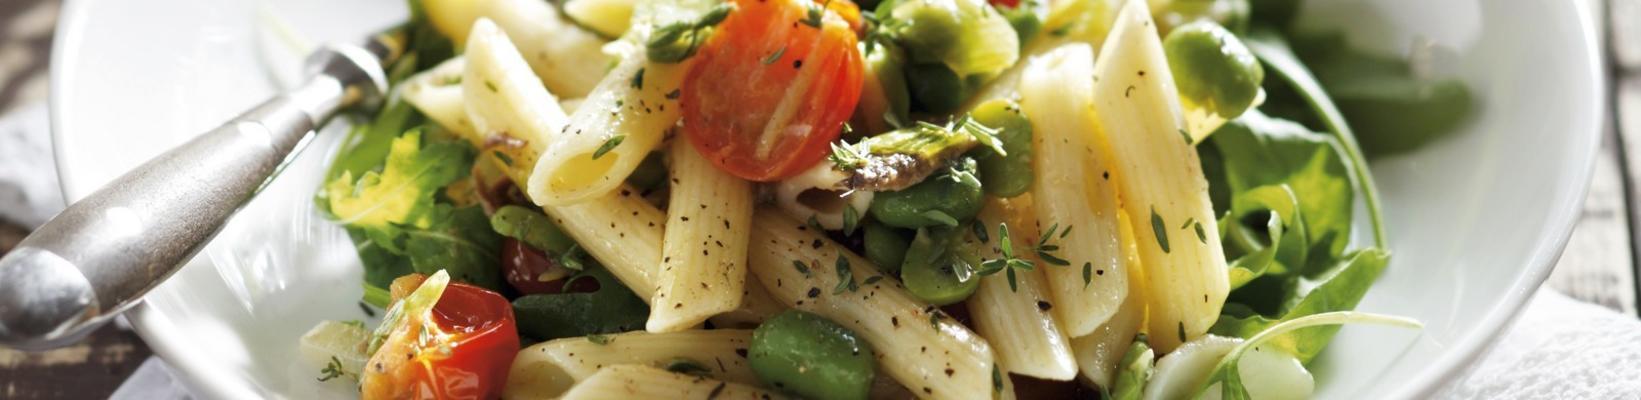 pasta with cherry tomato, anchovies and broad beans